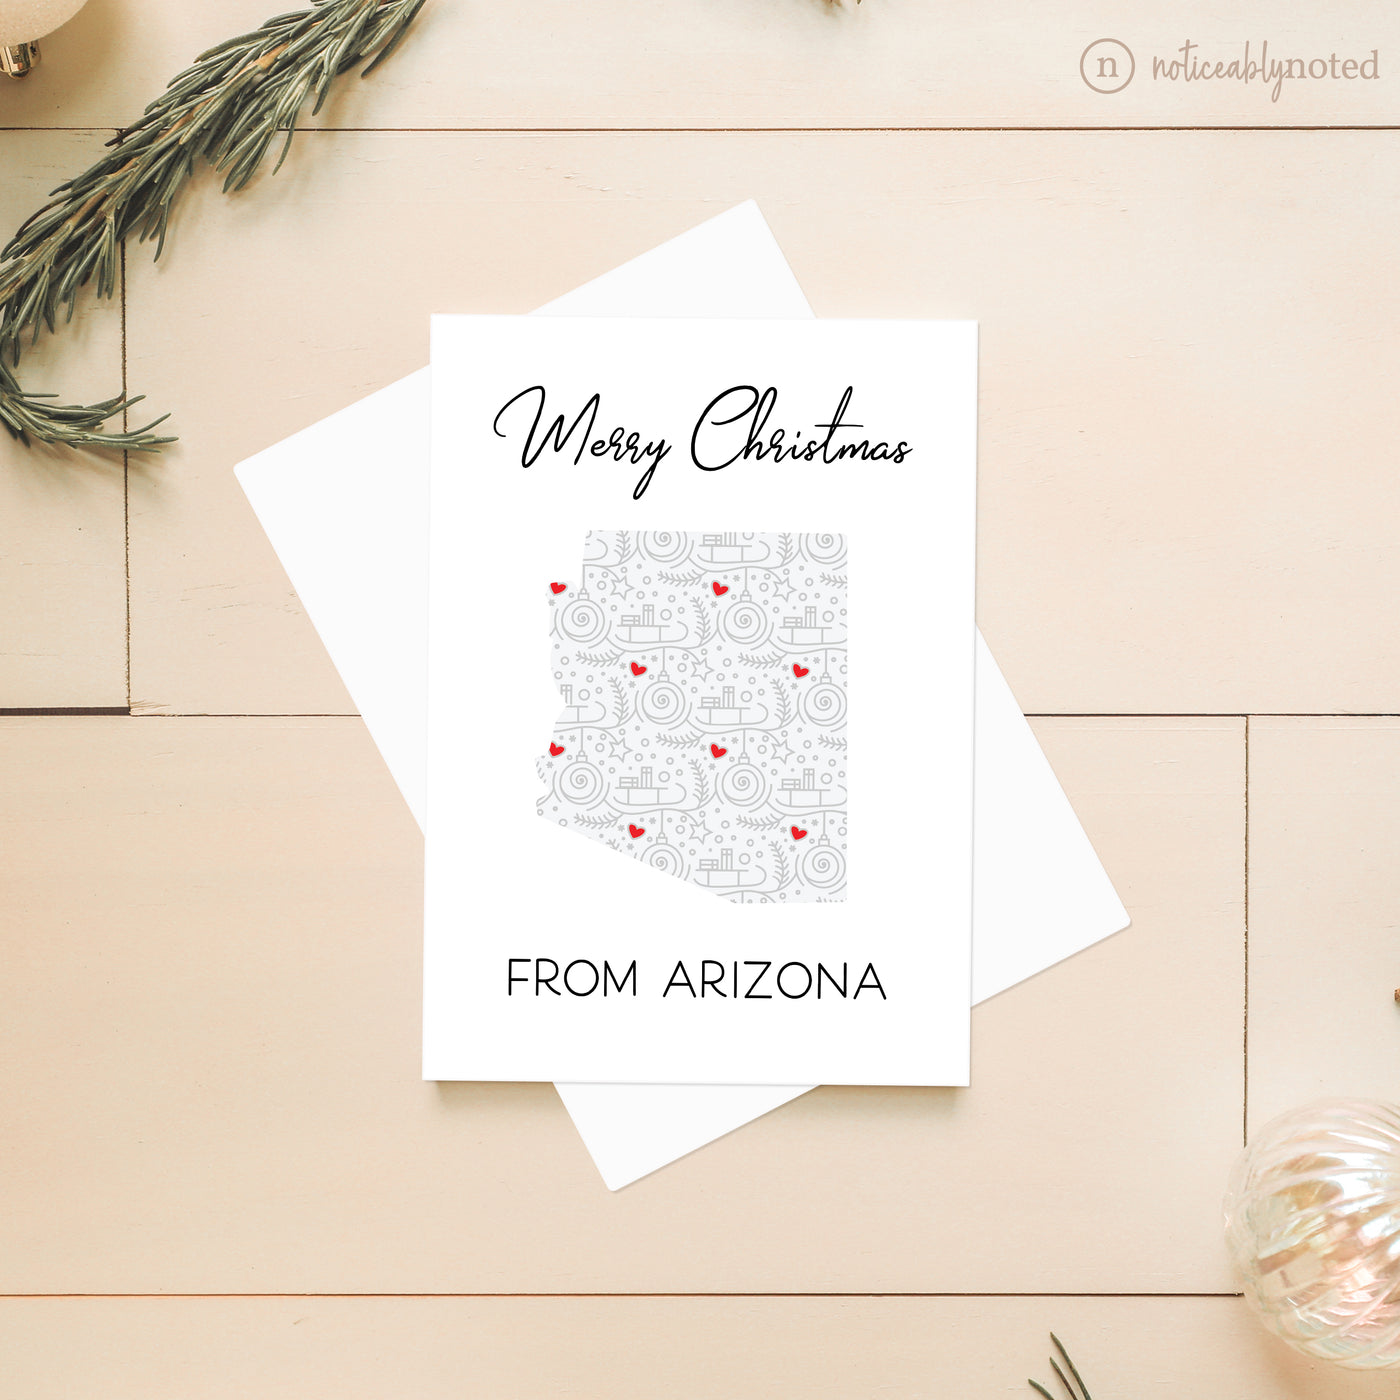 Arizona Christmas Cards | Noticeably Noted